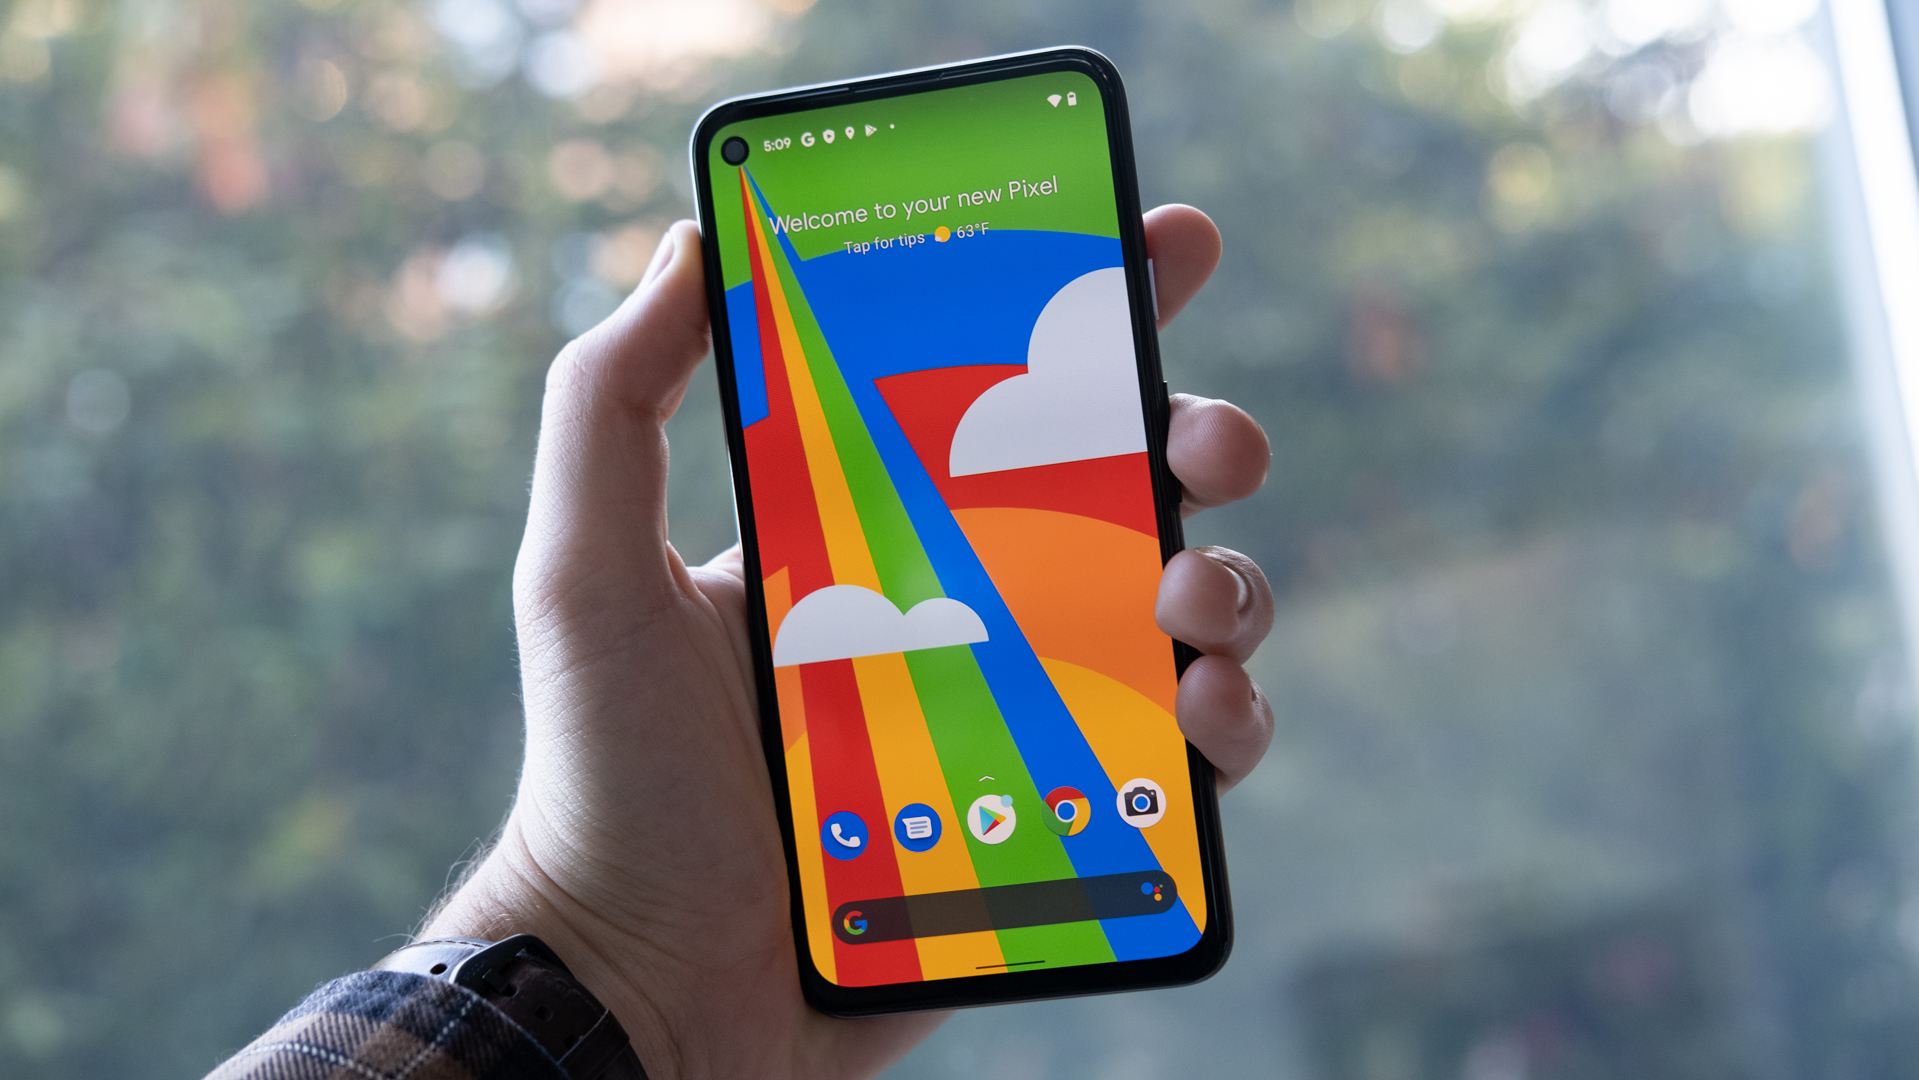 Google Pixel 4a 5G in hand showing the display.